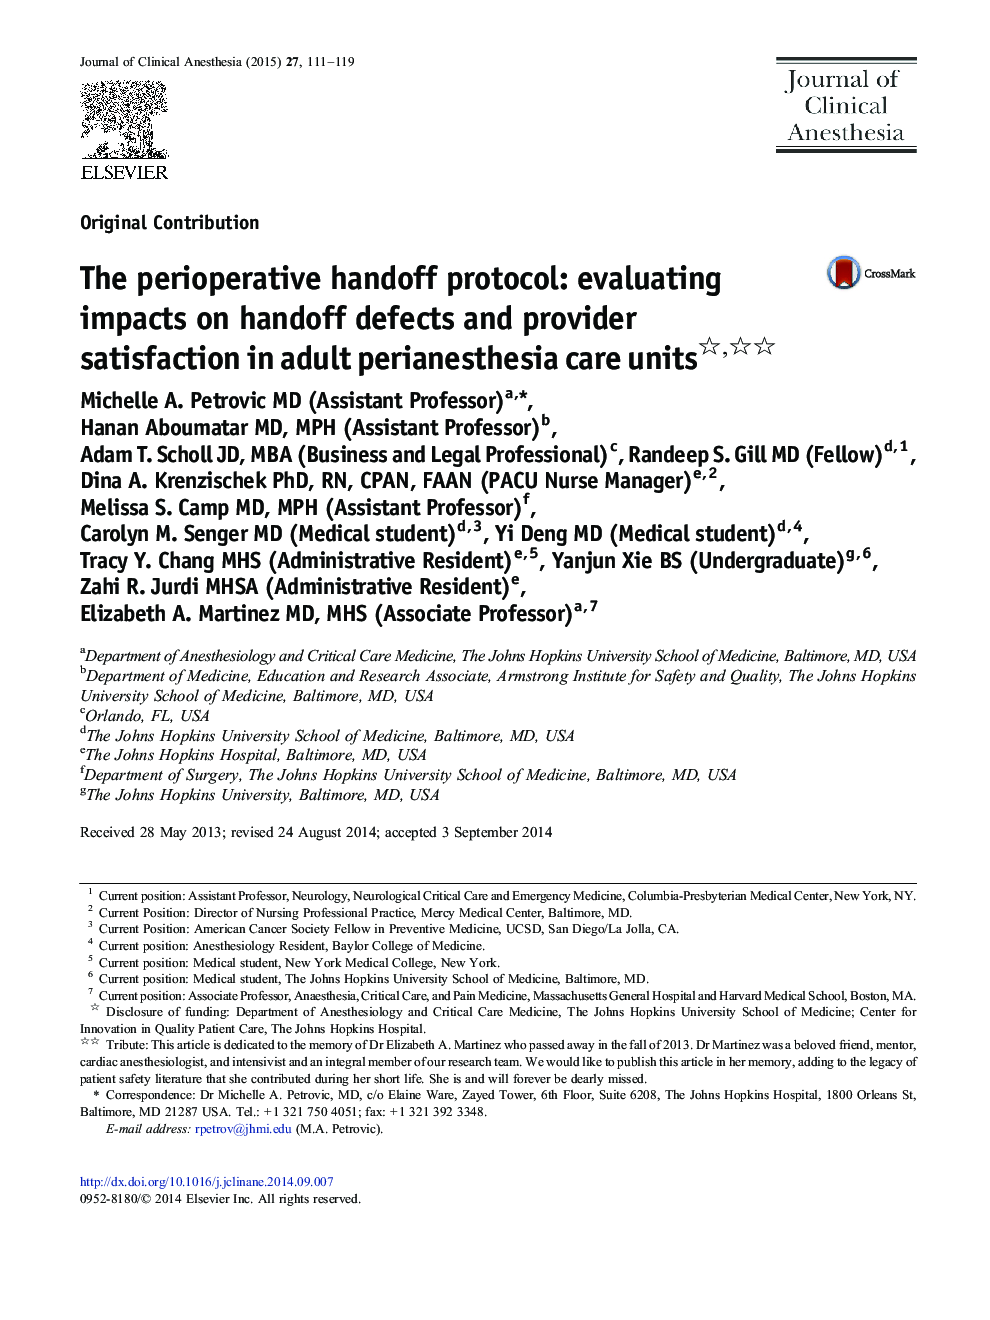 The perioperative handoff protocol: evaluating impacts on handoff defects and provider satisfaction in adult perianesthesia care units 